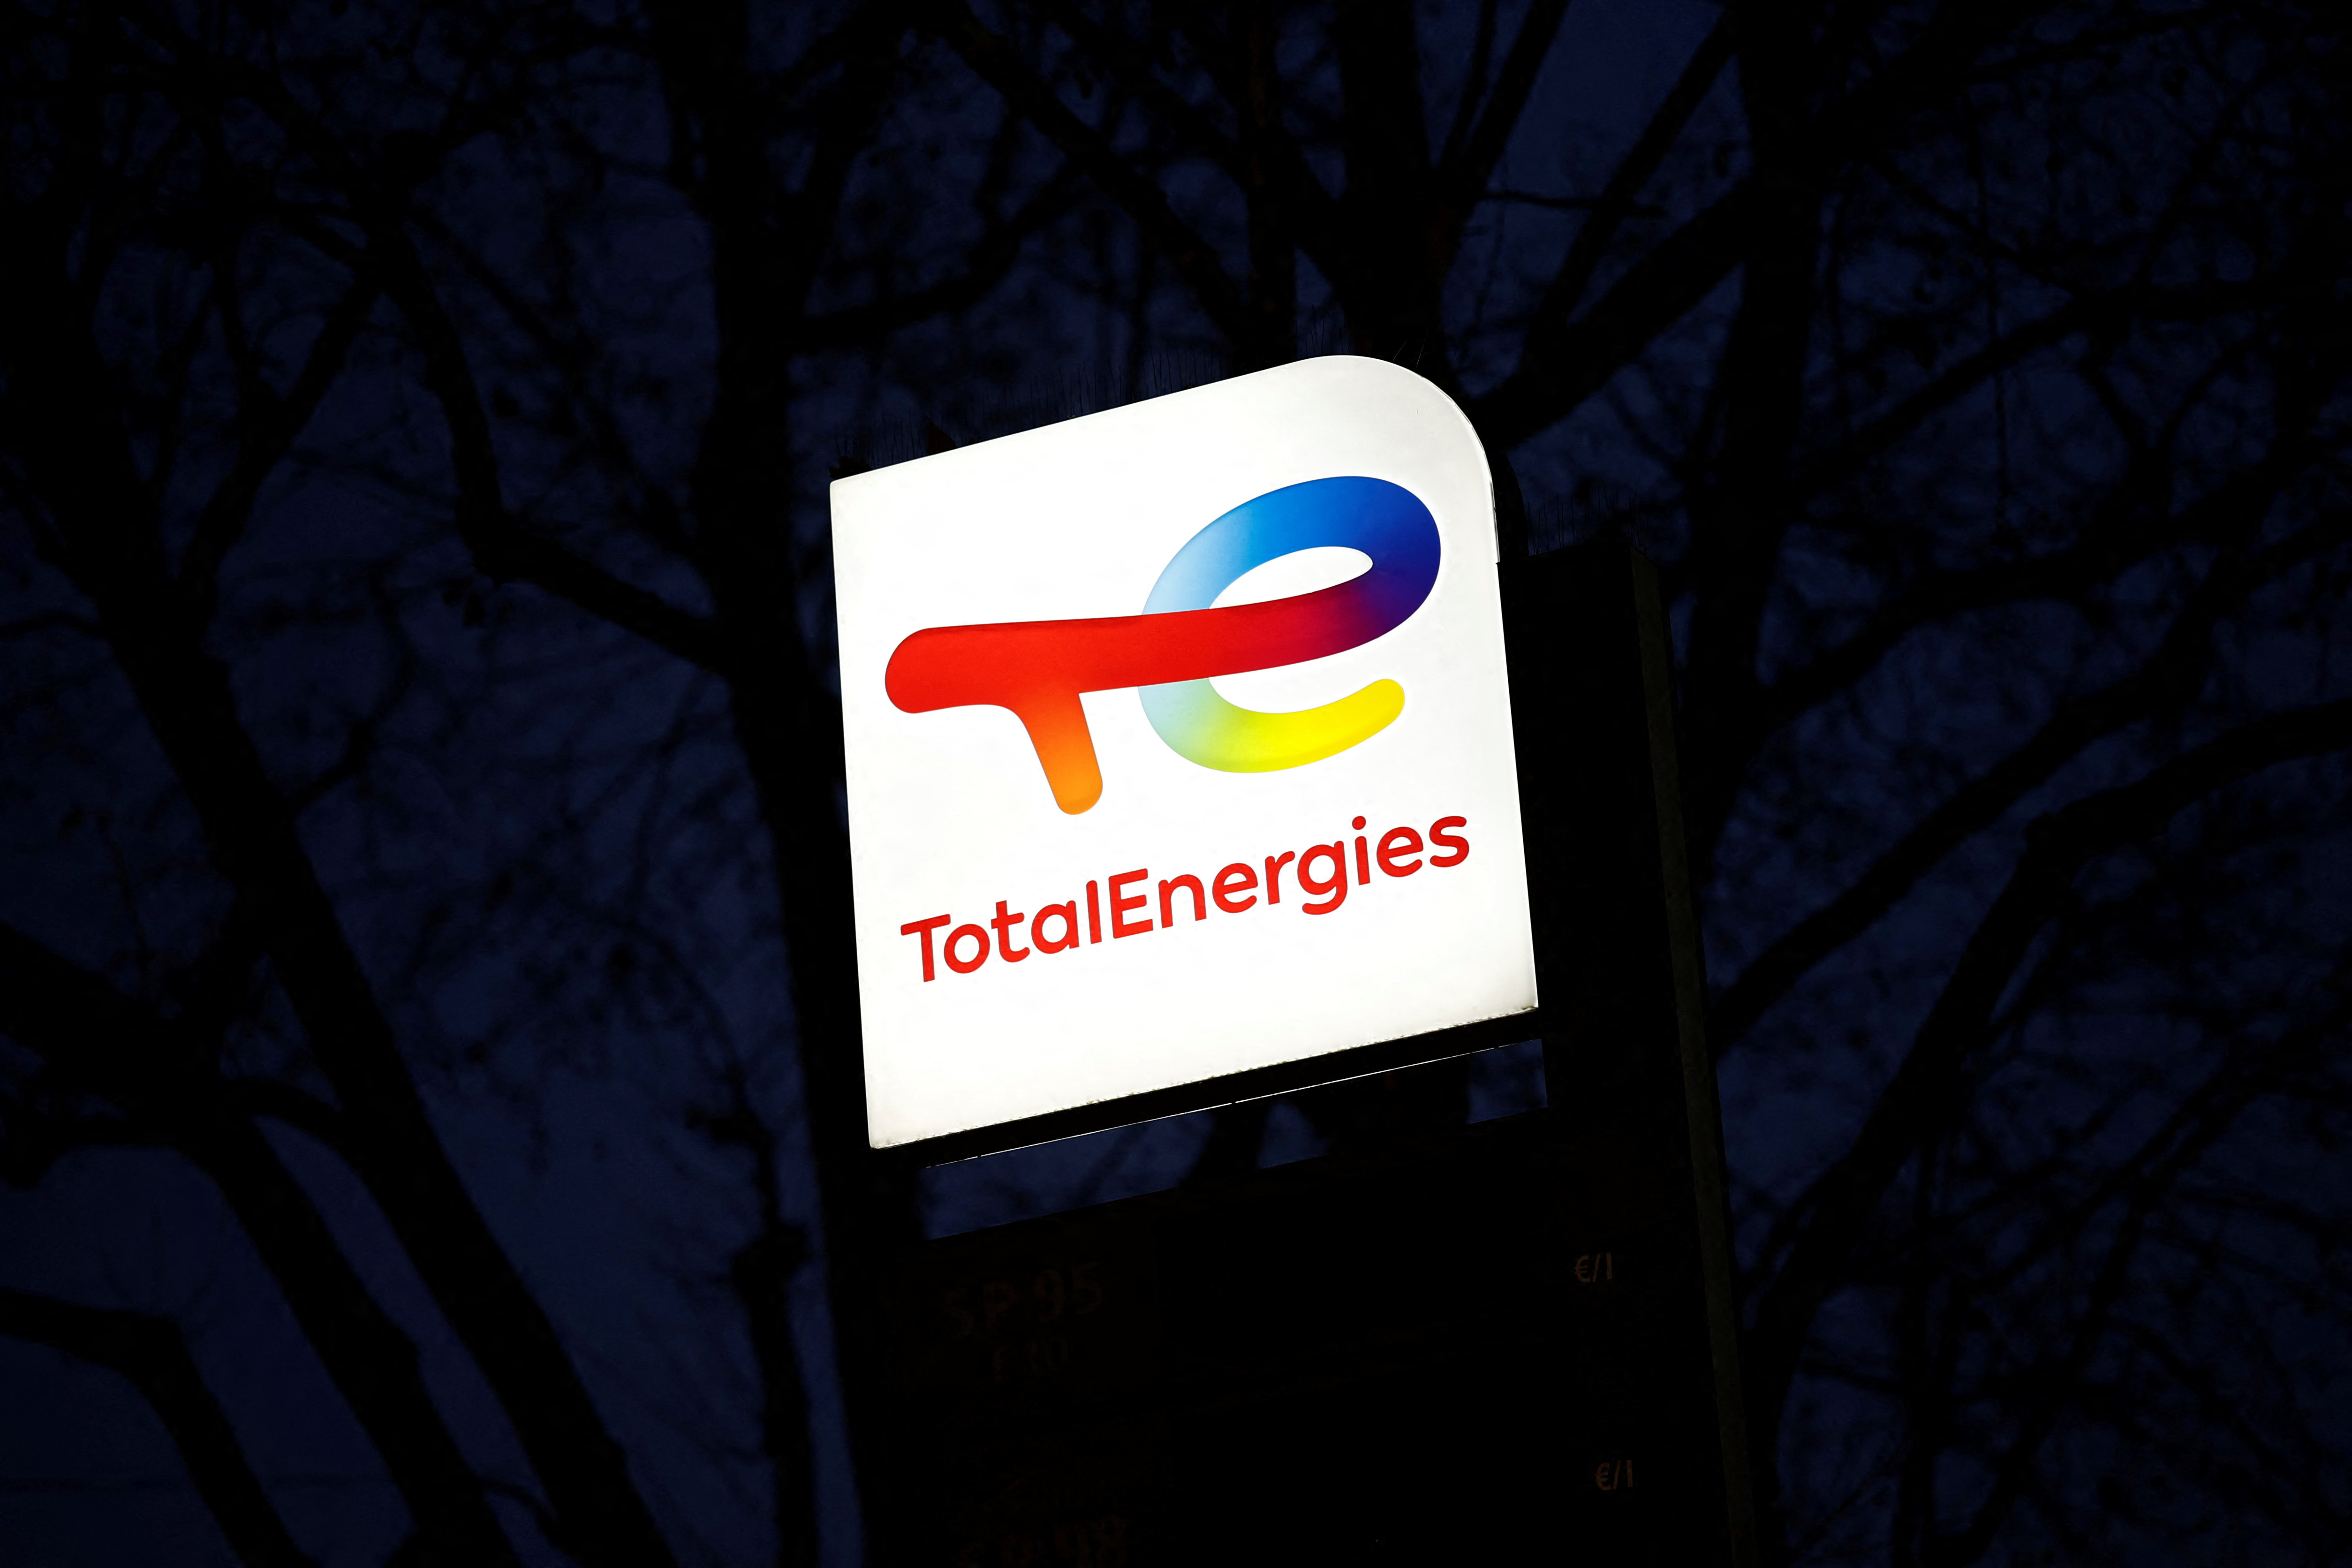 Signage at a TotalEnergies gas station in Paris